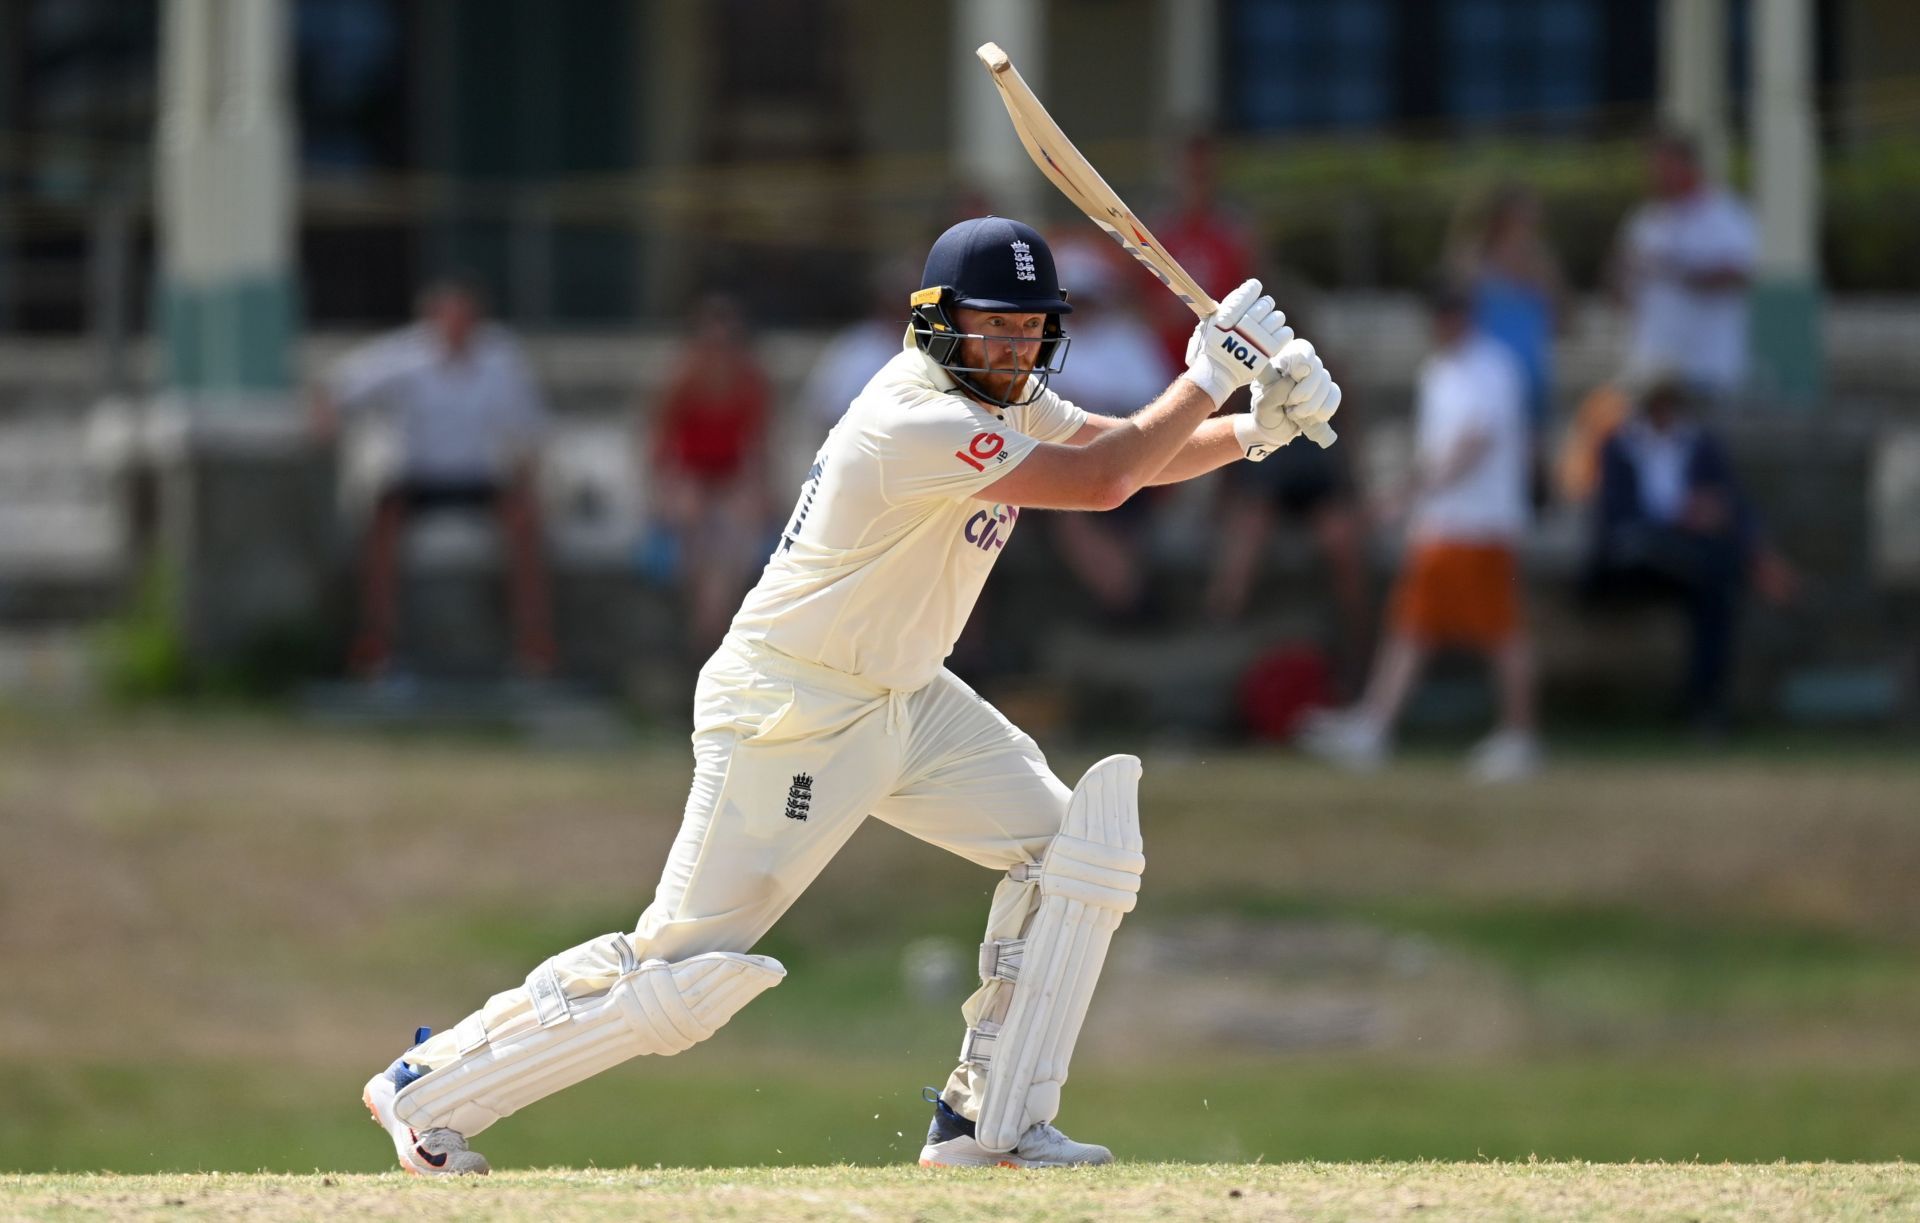 Jonny Bairstow would look to continue his good work in the WI vs ENG series